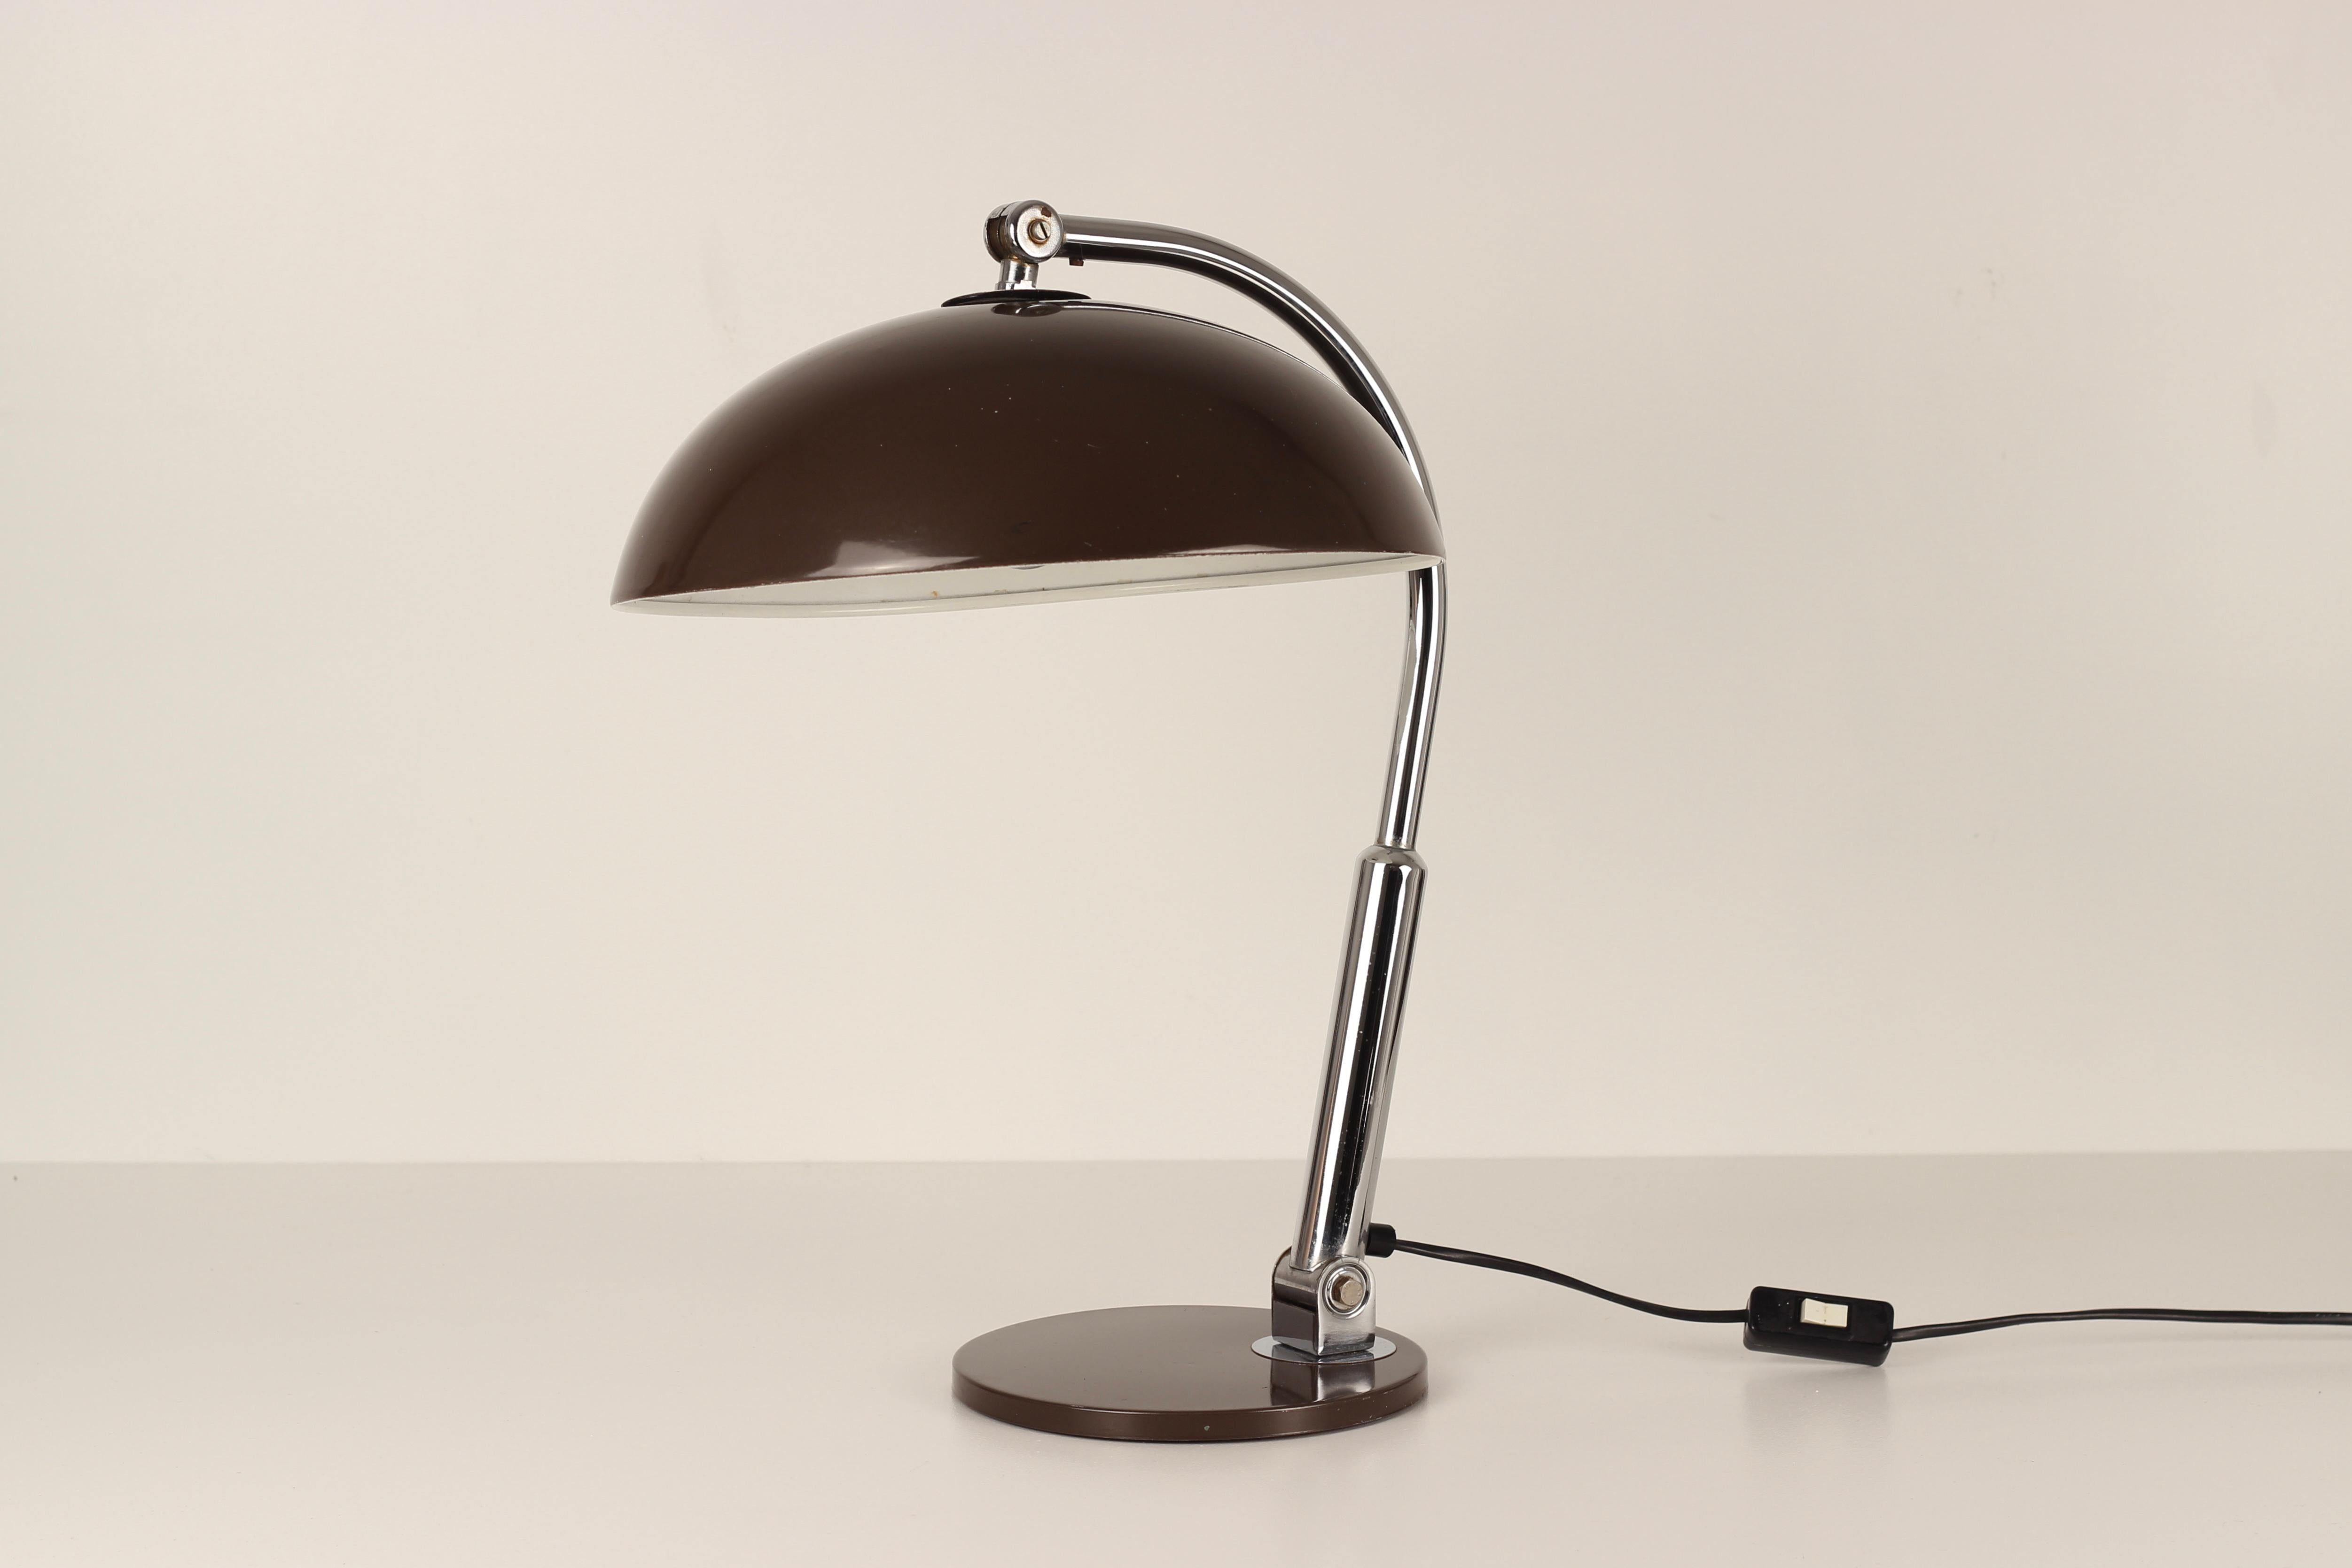 Popular lamp which was designed by Busquet and manufactured by Hala Zeist Lampenfababriek in Holland, circa 1960s. This piece features a dark brown dome shade and a flat disc base. It can be adjusted and positioned in many different ways to suit the